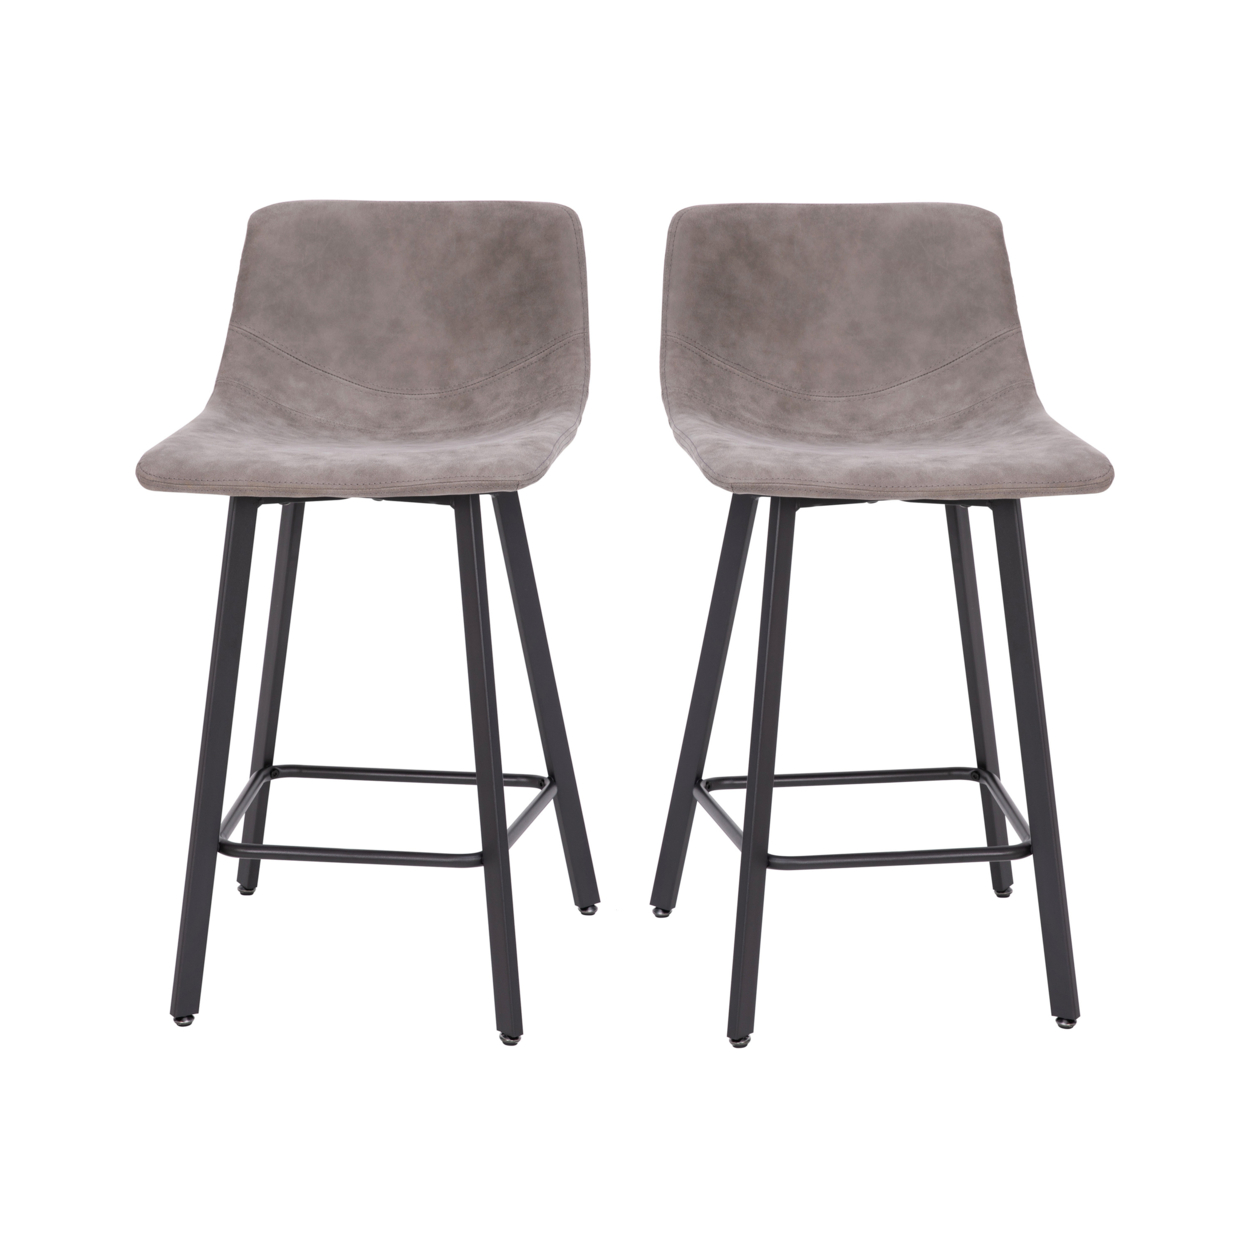 2 Piece 24 Inch Stool, Gray Leather, Metal Angled Legs